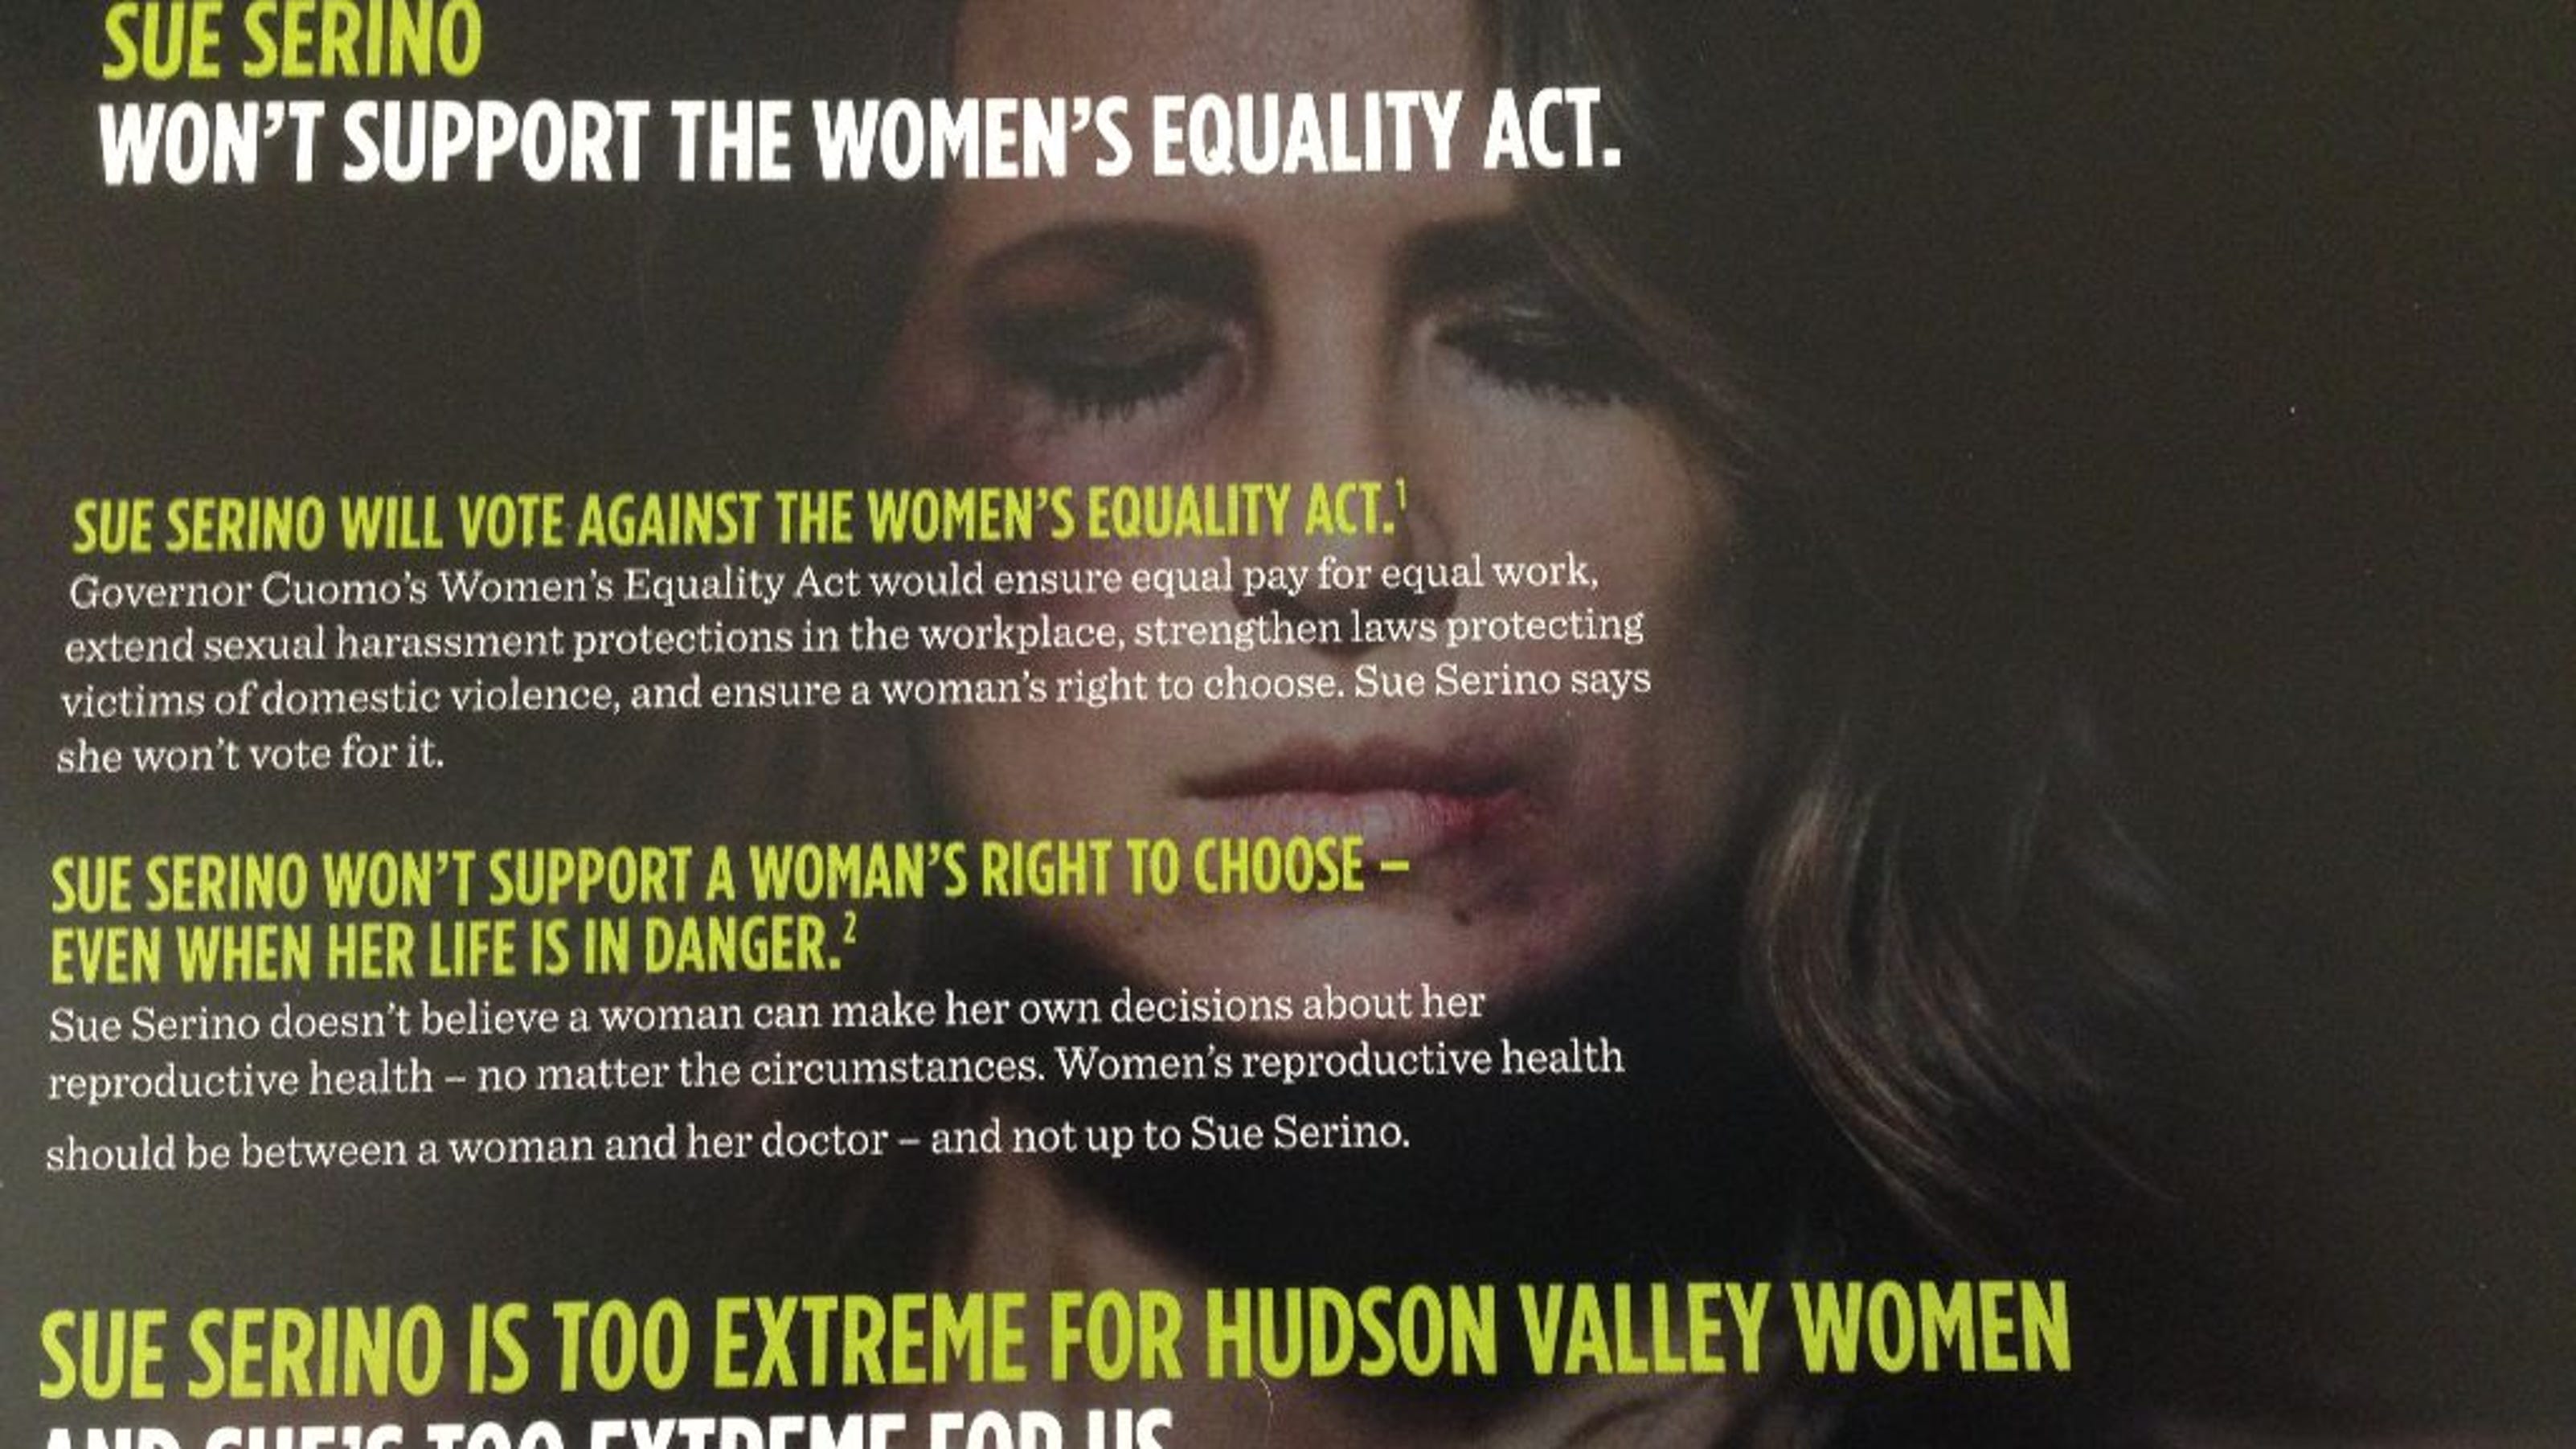 Union Using Images of Battered Women to Defeat Republicans